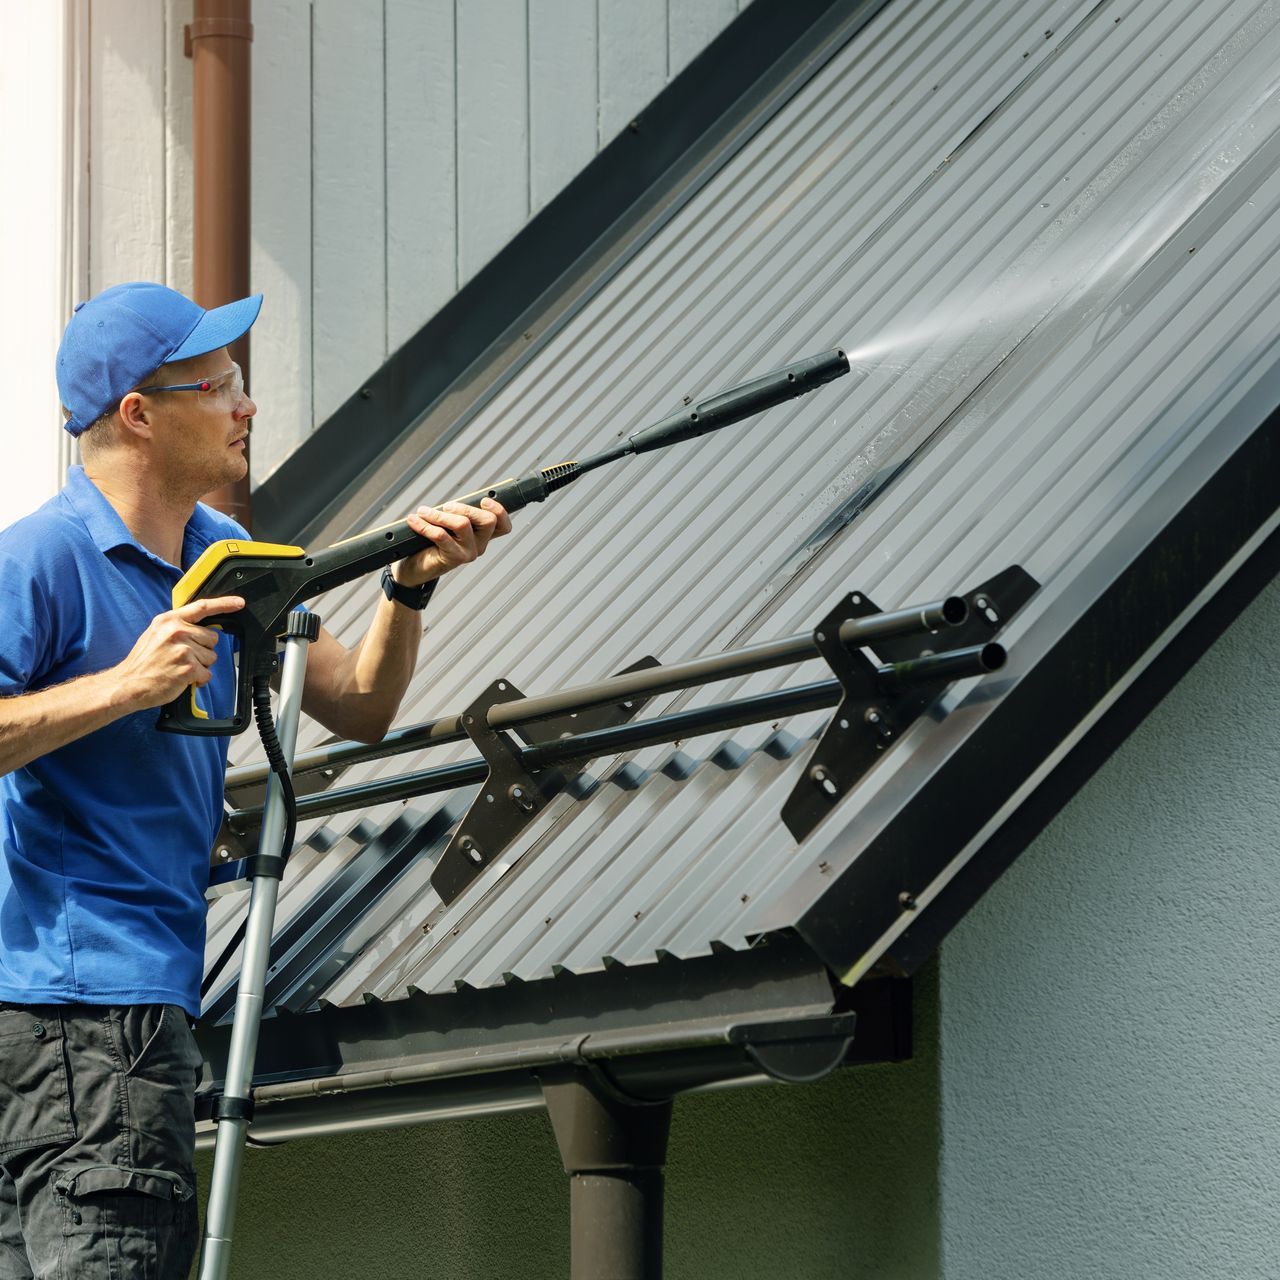 A man is using a soft pressure washer to clean a roof